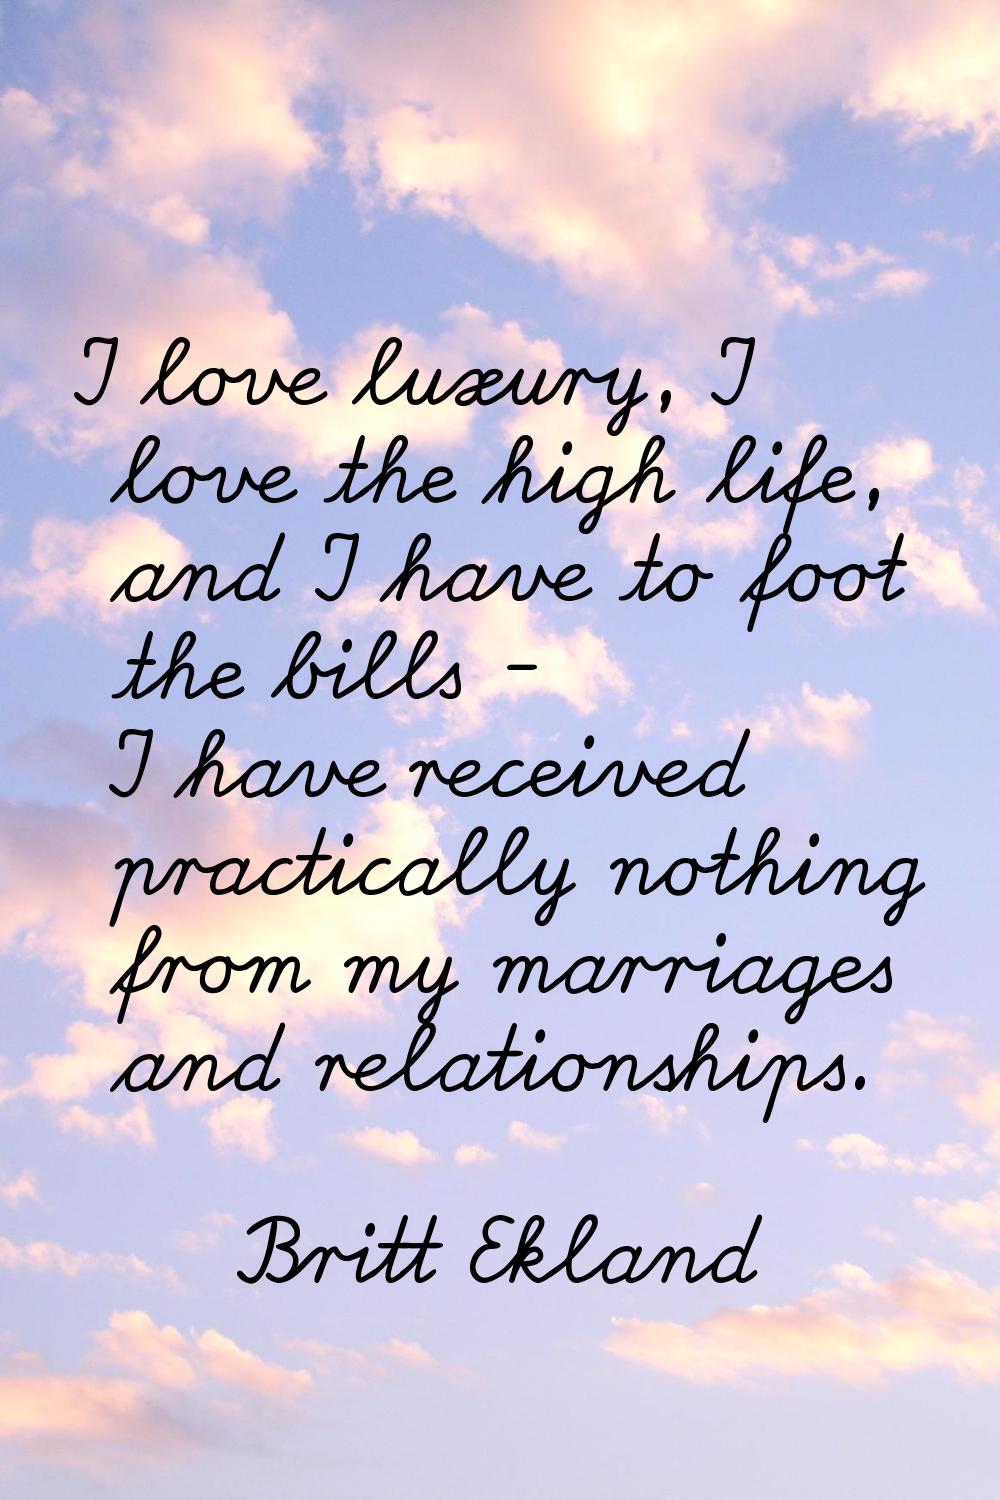 I love luxury, I love the high life, and I have to foot the bills - I have received practically not